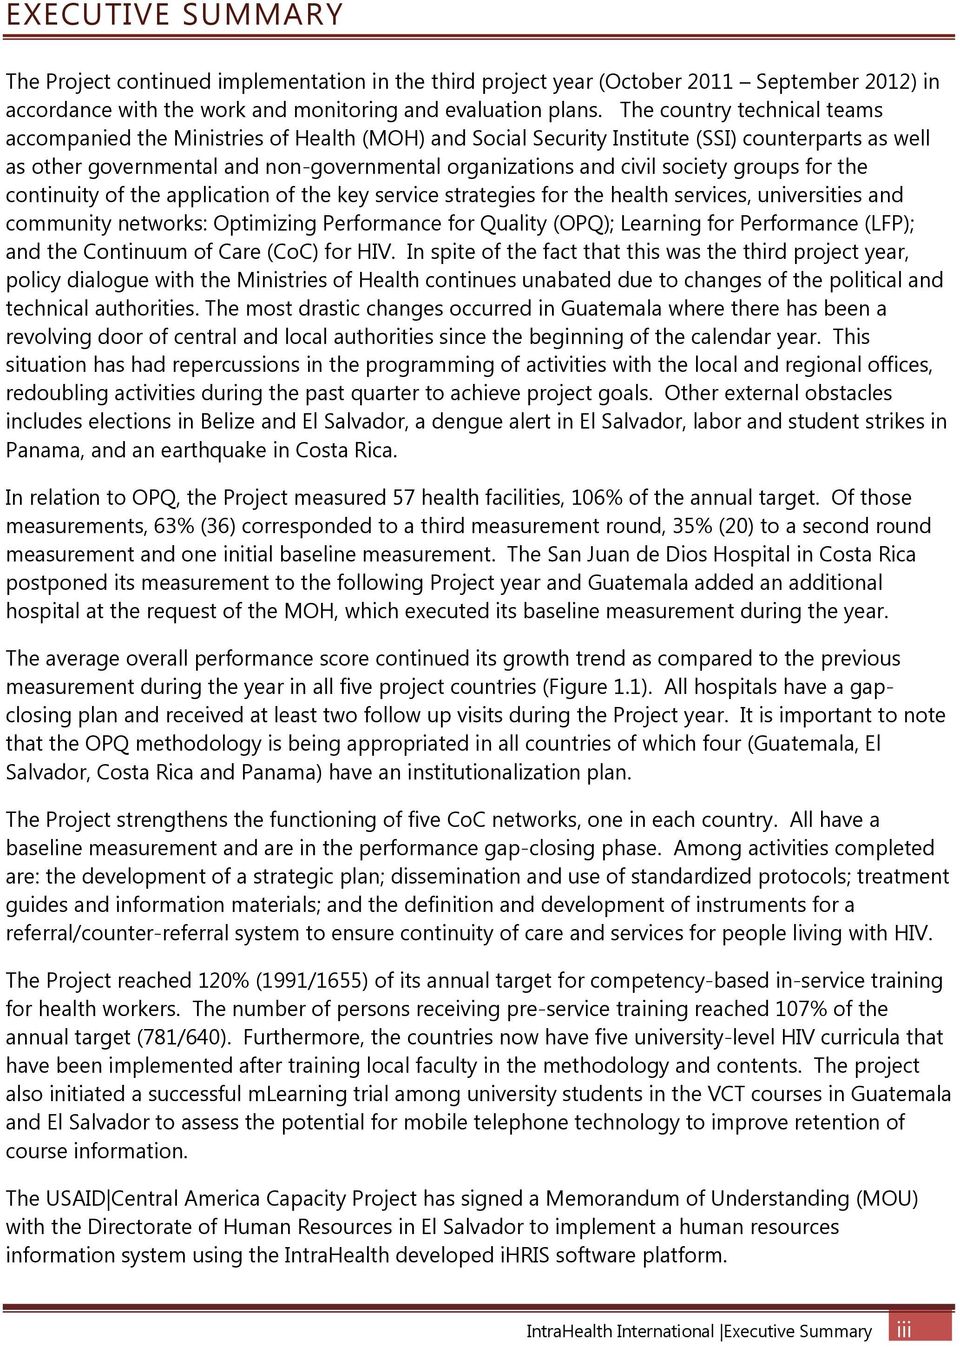 society groups for the continuity of the application of the key service strategies for the health services, universities and community networks: Optimizing Performance for Quality (OPQ); Learning for